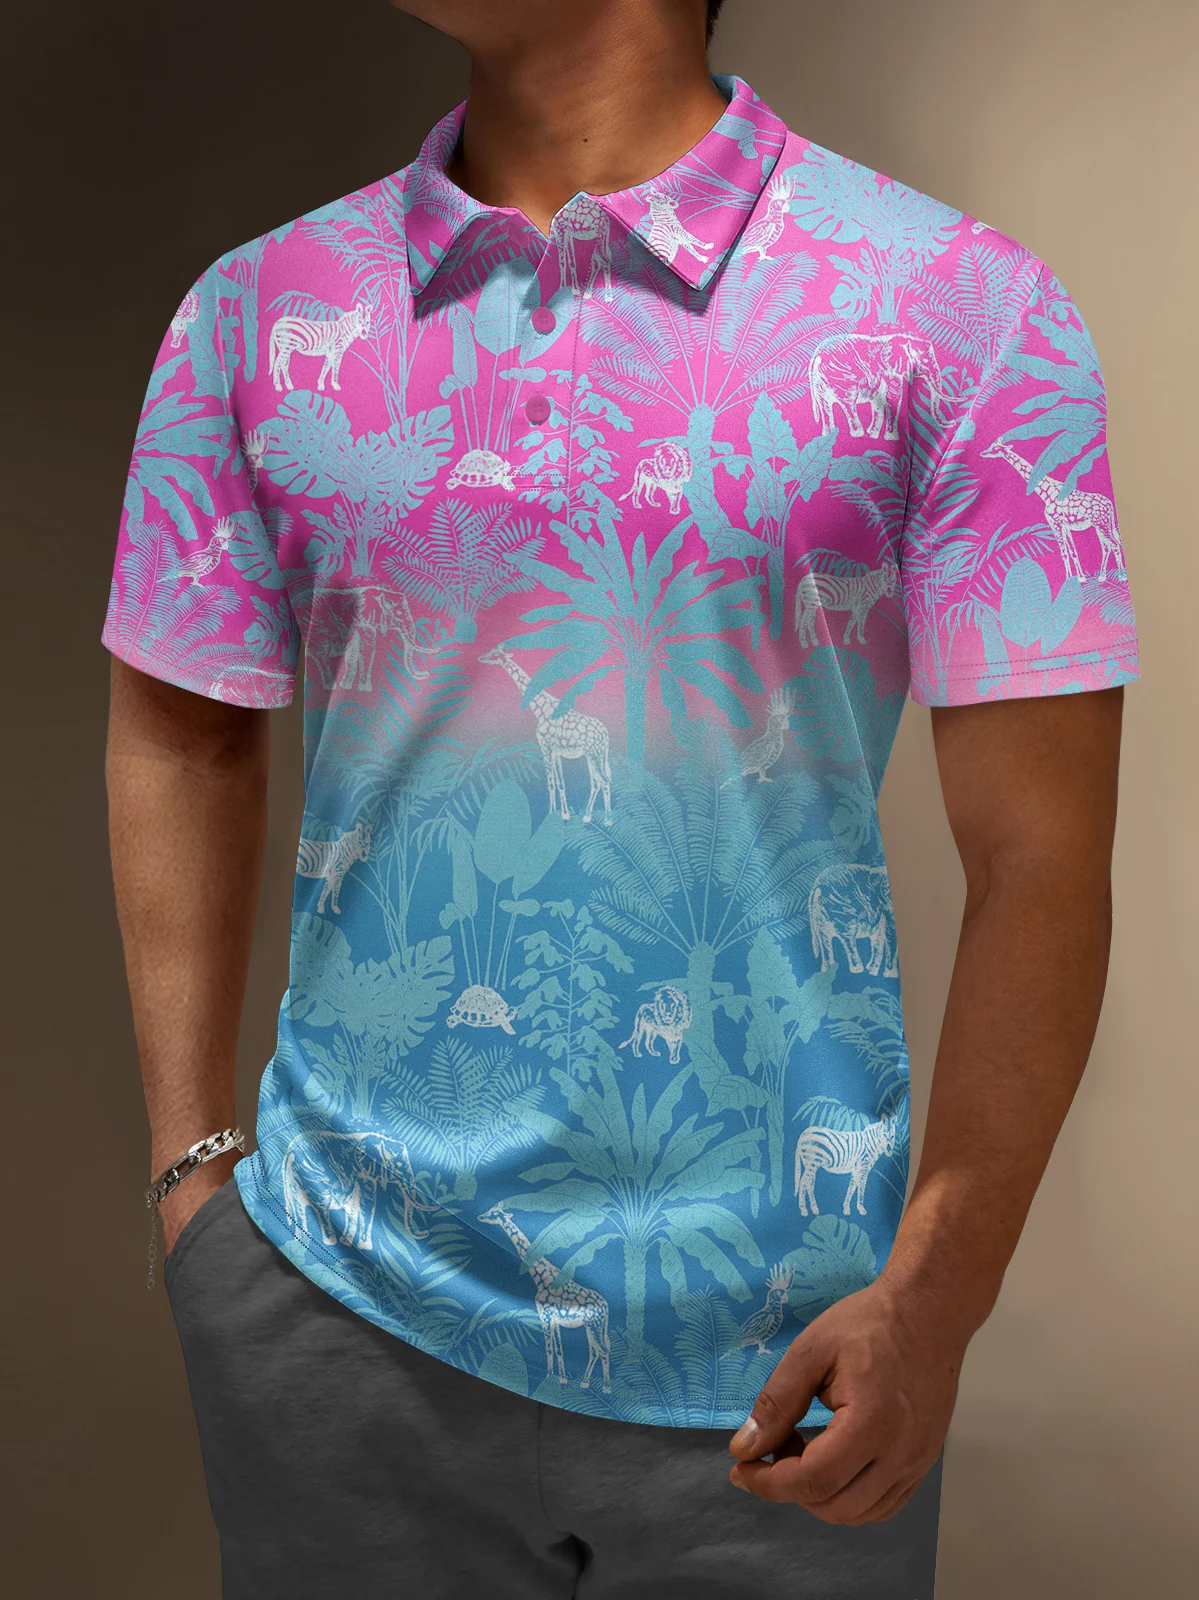 Hardaddy Moisture-wicking Golf Polo Gradient Color Tropical Plants Animals